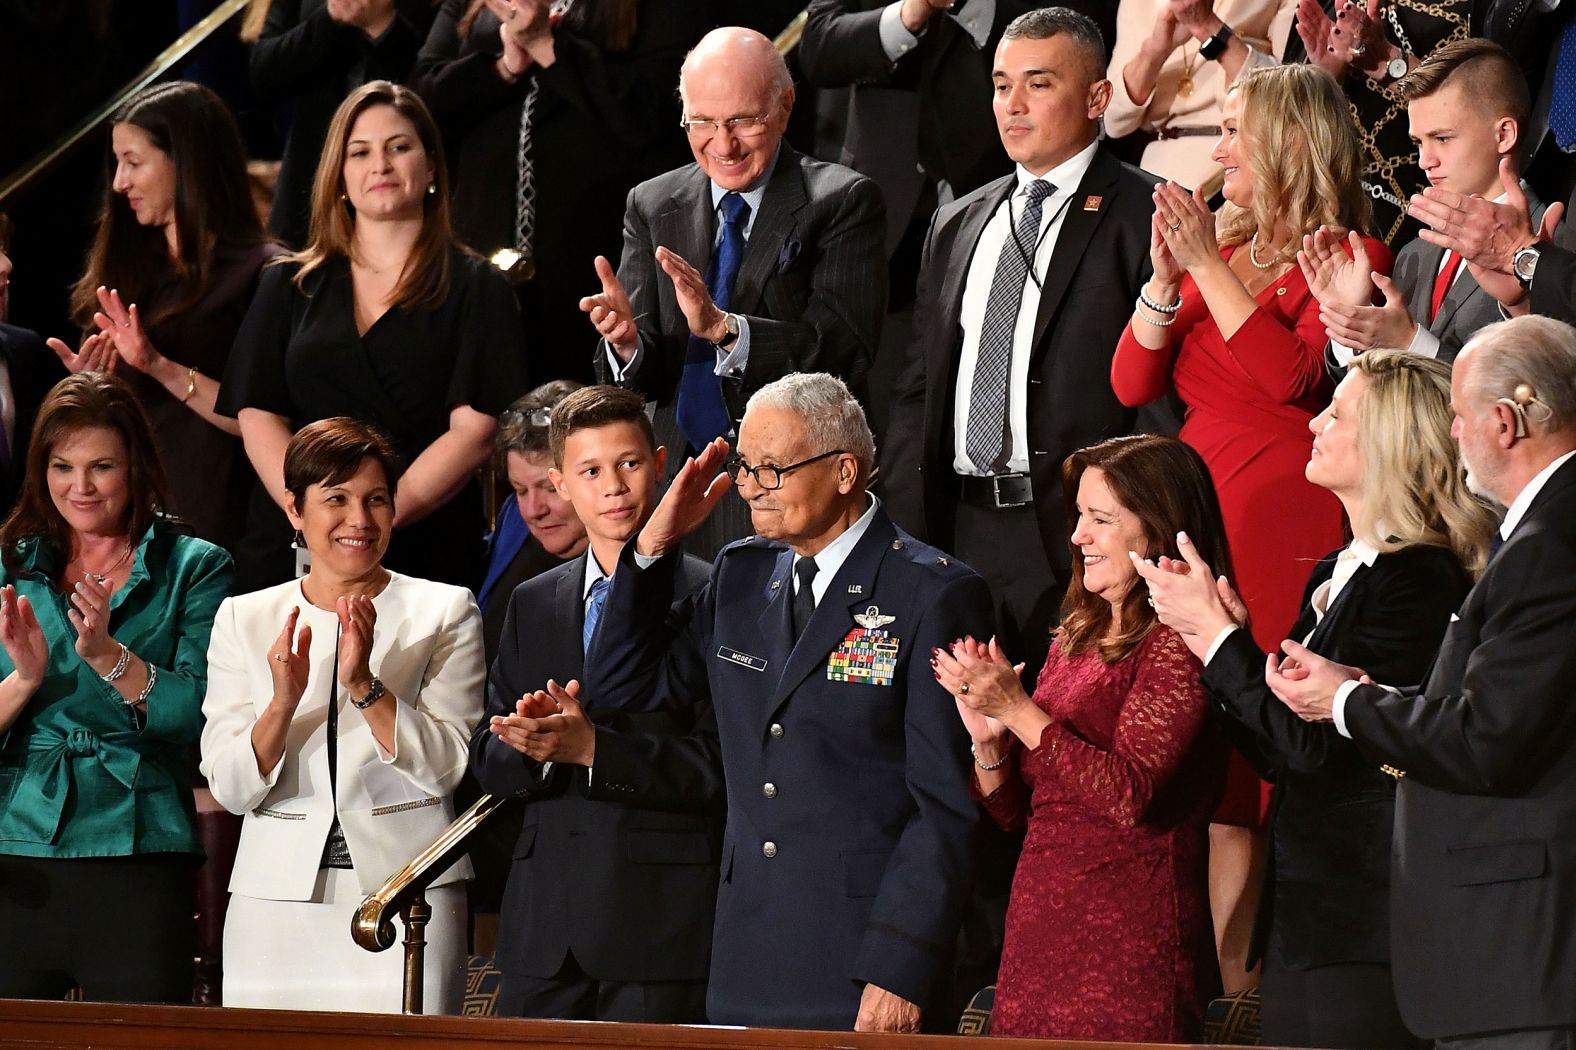 Retired Brig. Gen. Charles McGee, one of the Tuskegee Airmen, salutes as Trump acknowledges him and his great-grandson, Iain Lanphier. McGee is 100 years old.